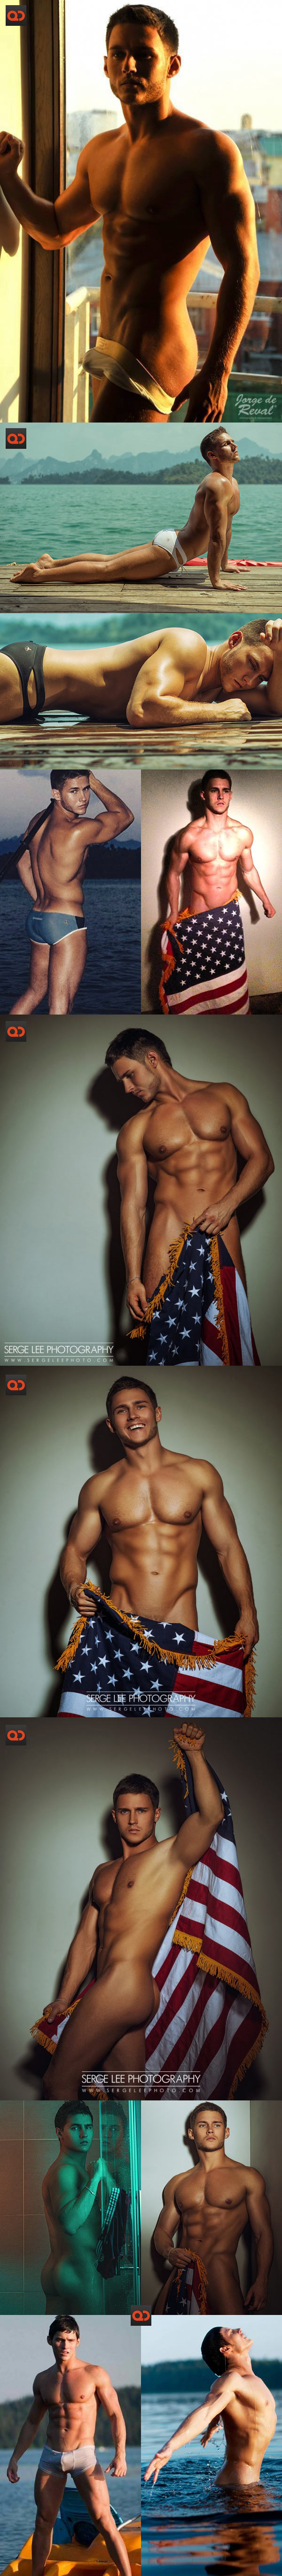 qc-scandal-model-anatoly-goncharov-exposed-collage04